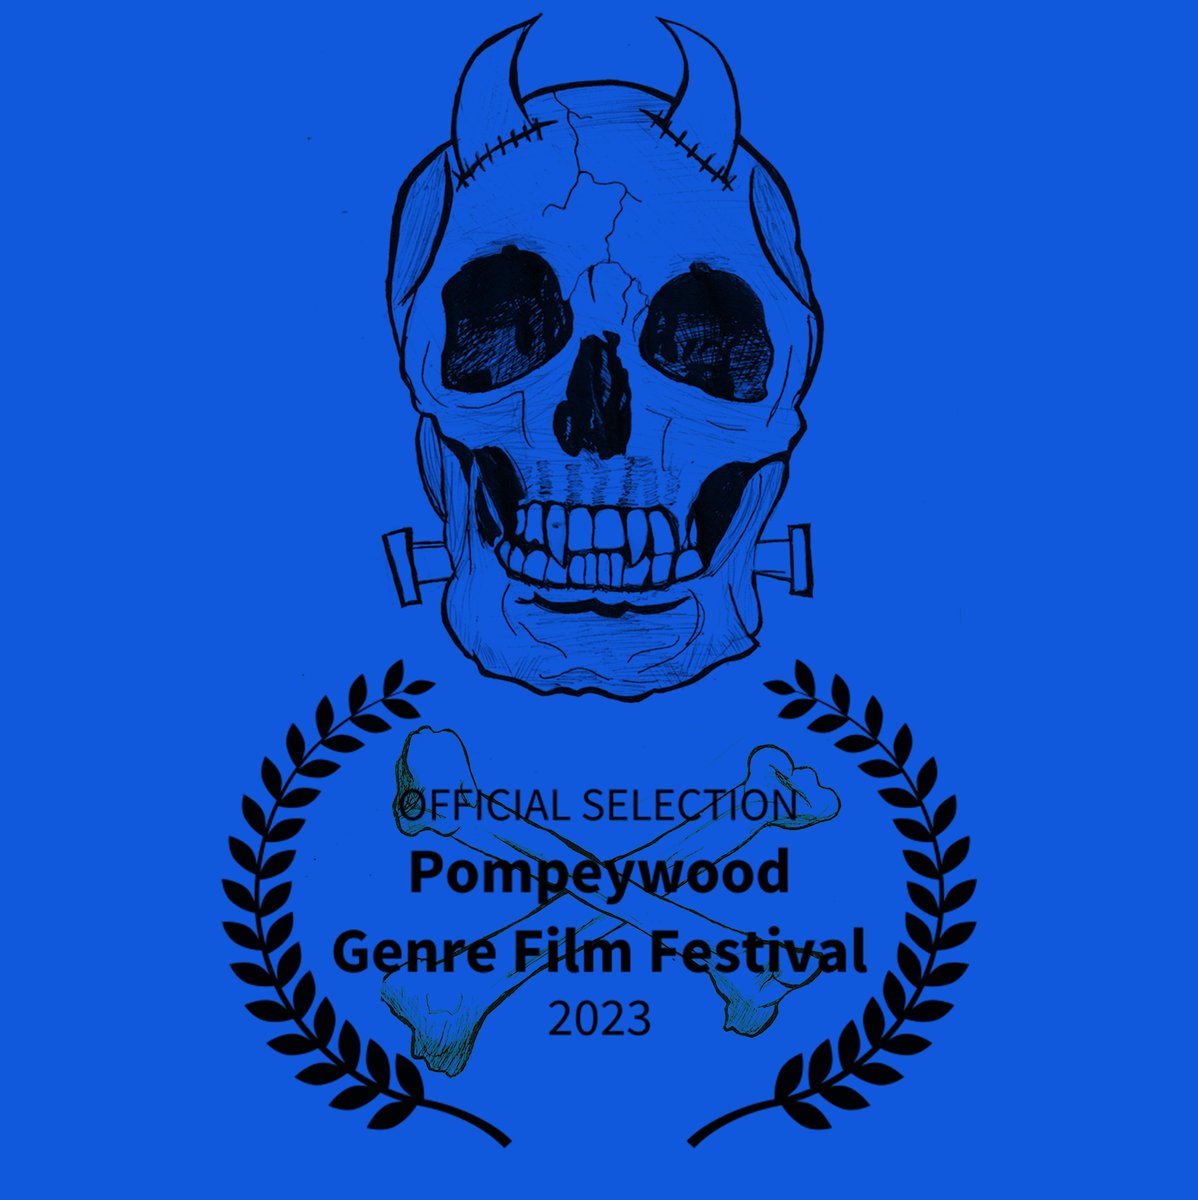 Delighted to be @WedgewoodRooms screening with The Pompeywood Genre Film Festival. @C_A_Sherwood @MitchCSnell @franccinelli @fraserwatsonart @guykward @rosiesteel @ncampbell_smith @Kate0Rourke and all you wonderful people on the team. Fill ur boots with popcorn!